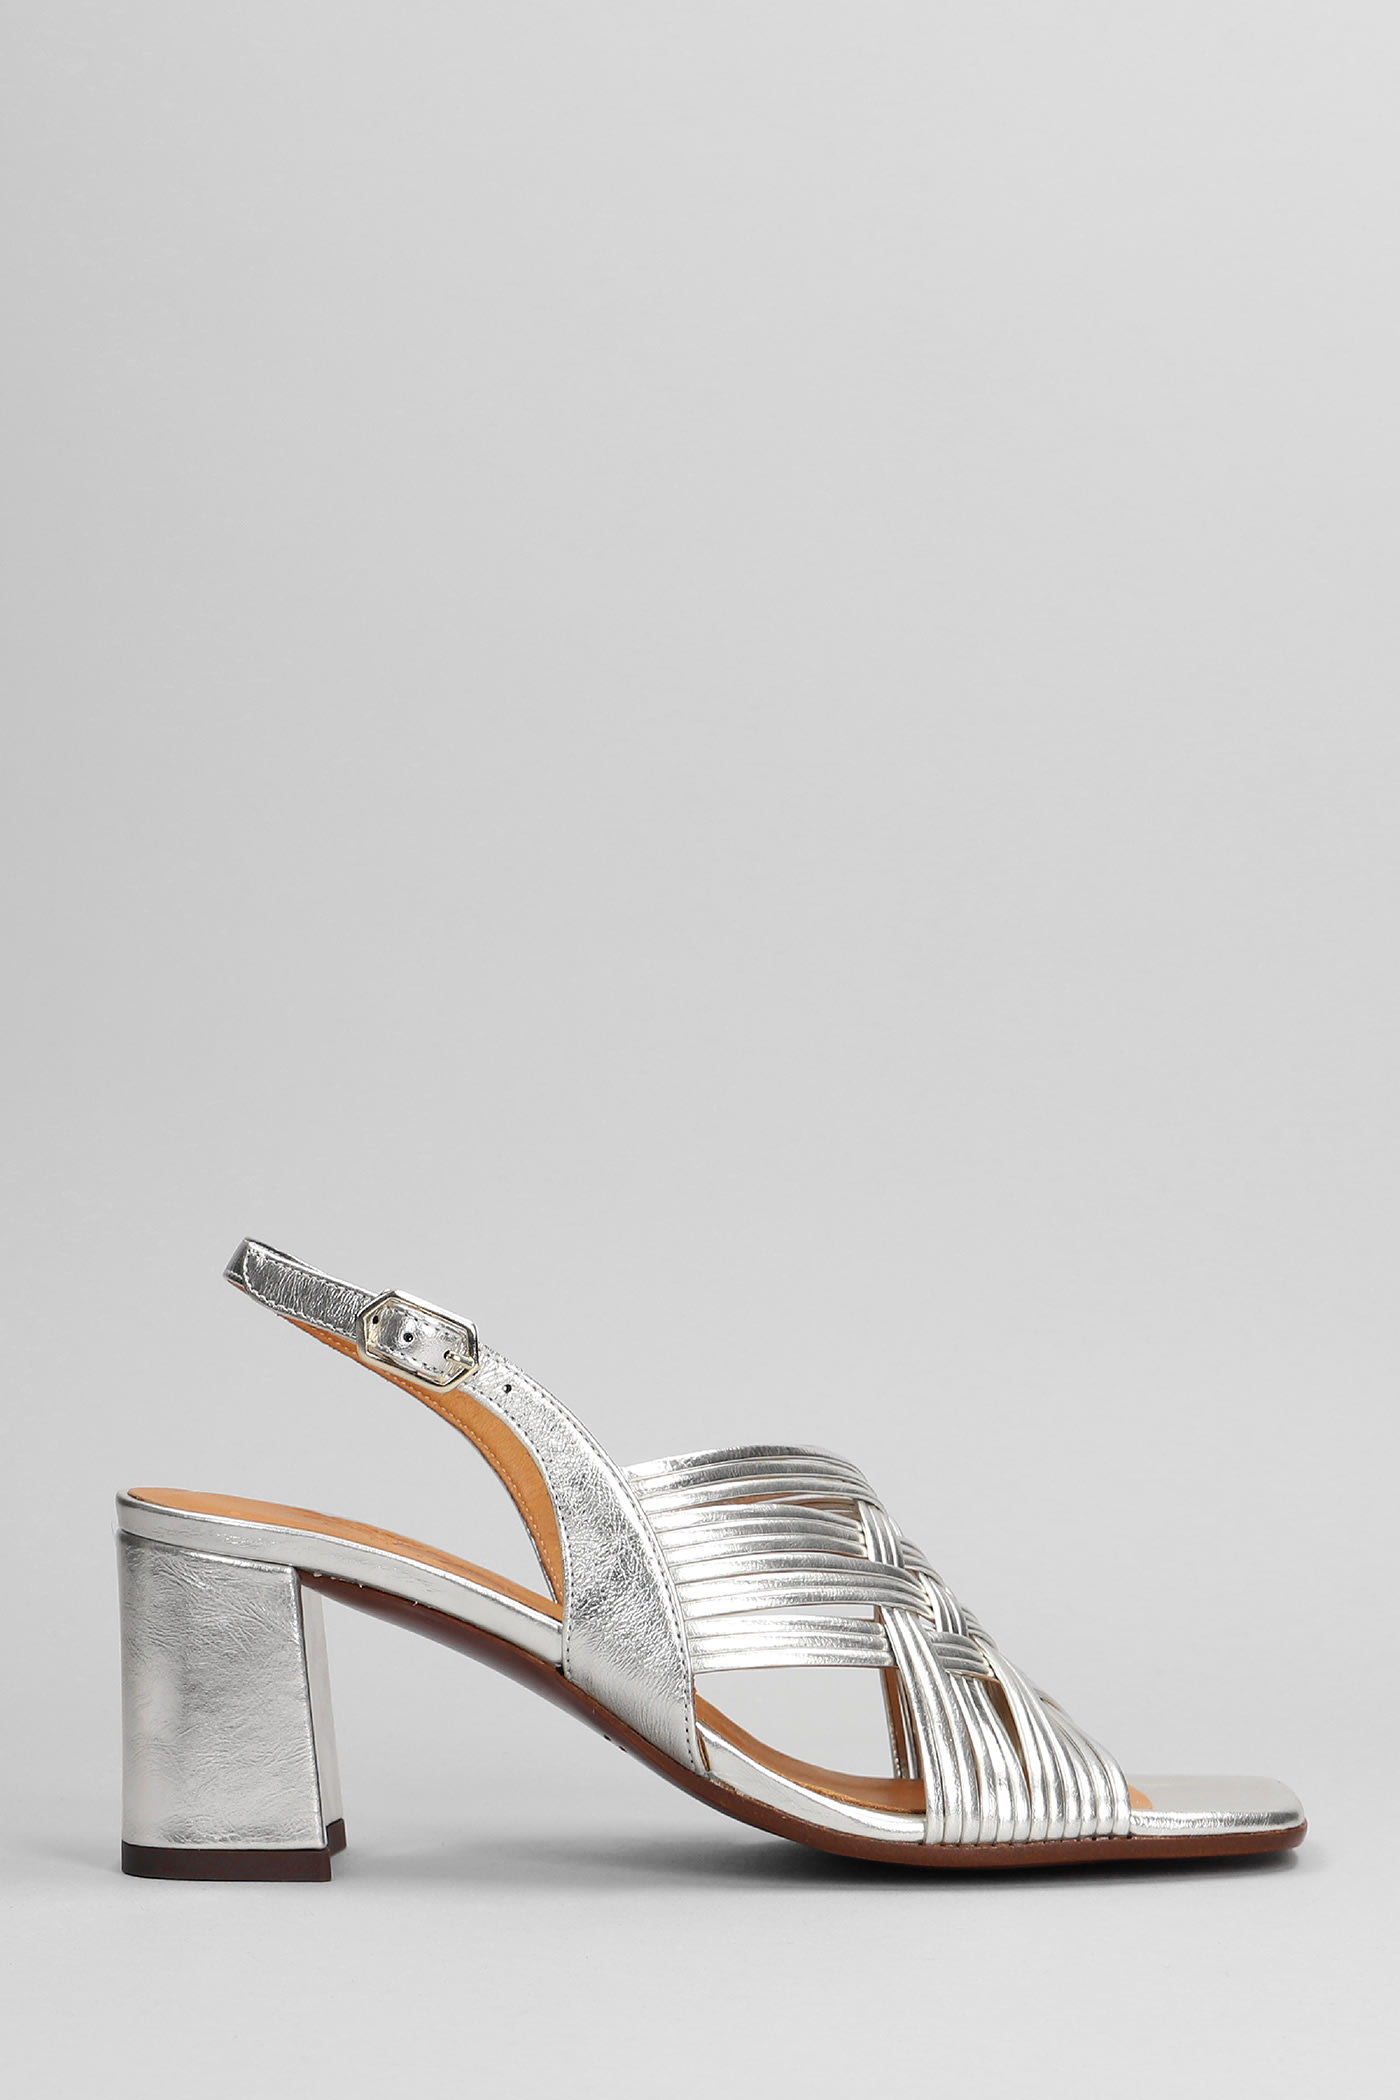 Chie Mihara Lubeya Sandals In Silver Leather